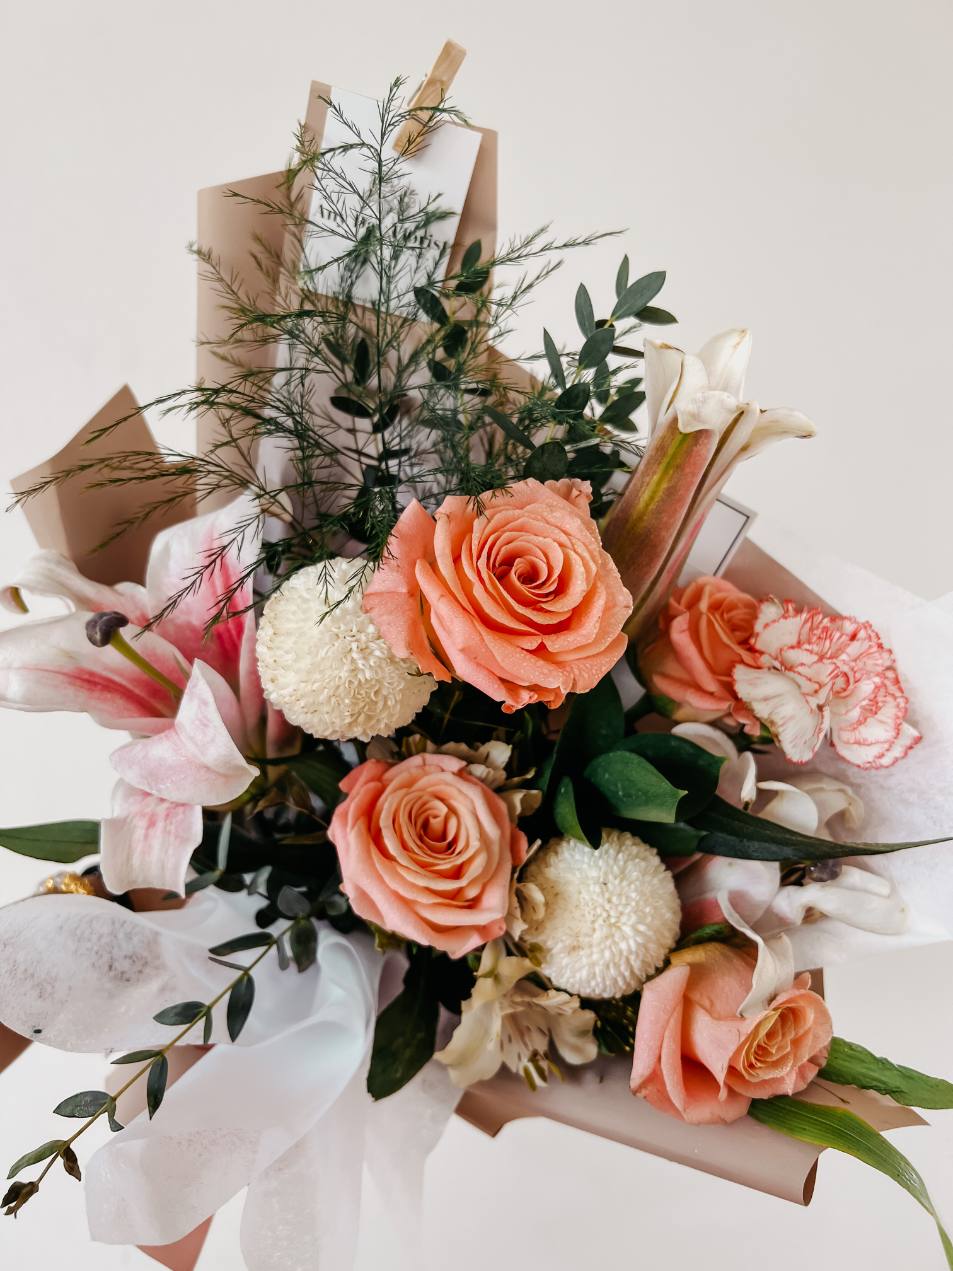 Any Day FloristBeautiful combinations of lilies from holland and garden roses perfect gift for all the mothers out there!
*Please note that our selection of flowers may differ sligLilian Rosie | Shimmer Coral Roses with Lilies